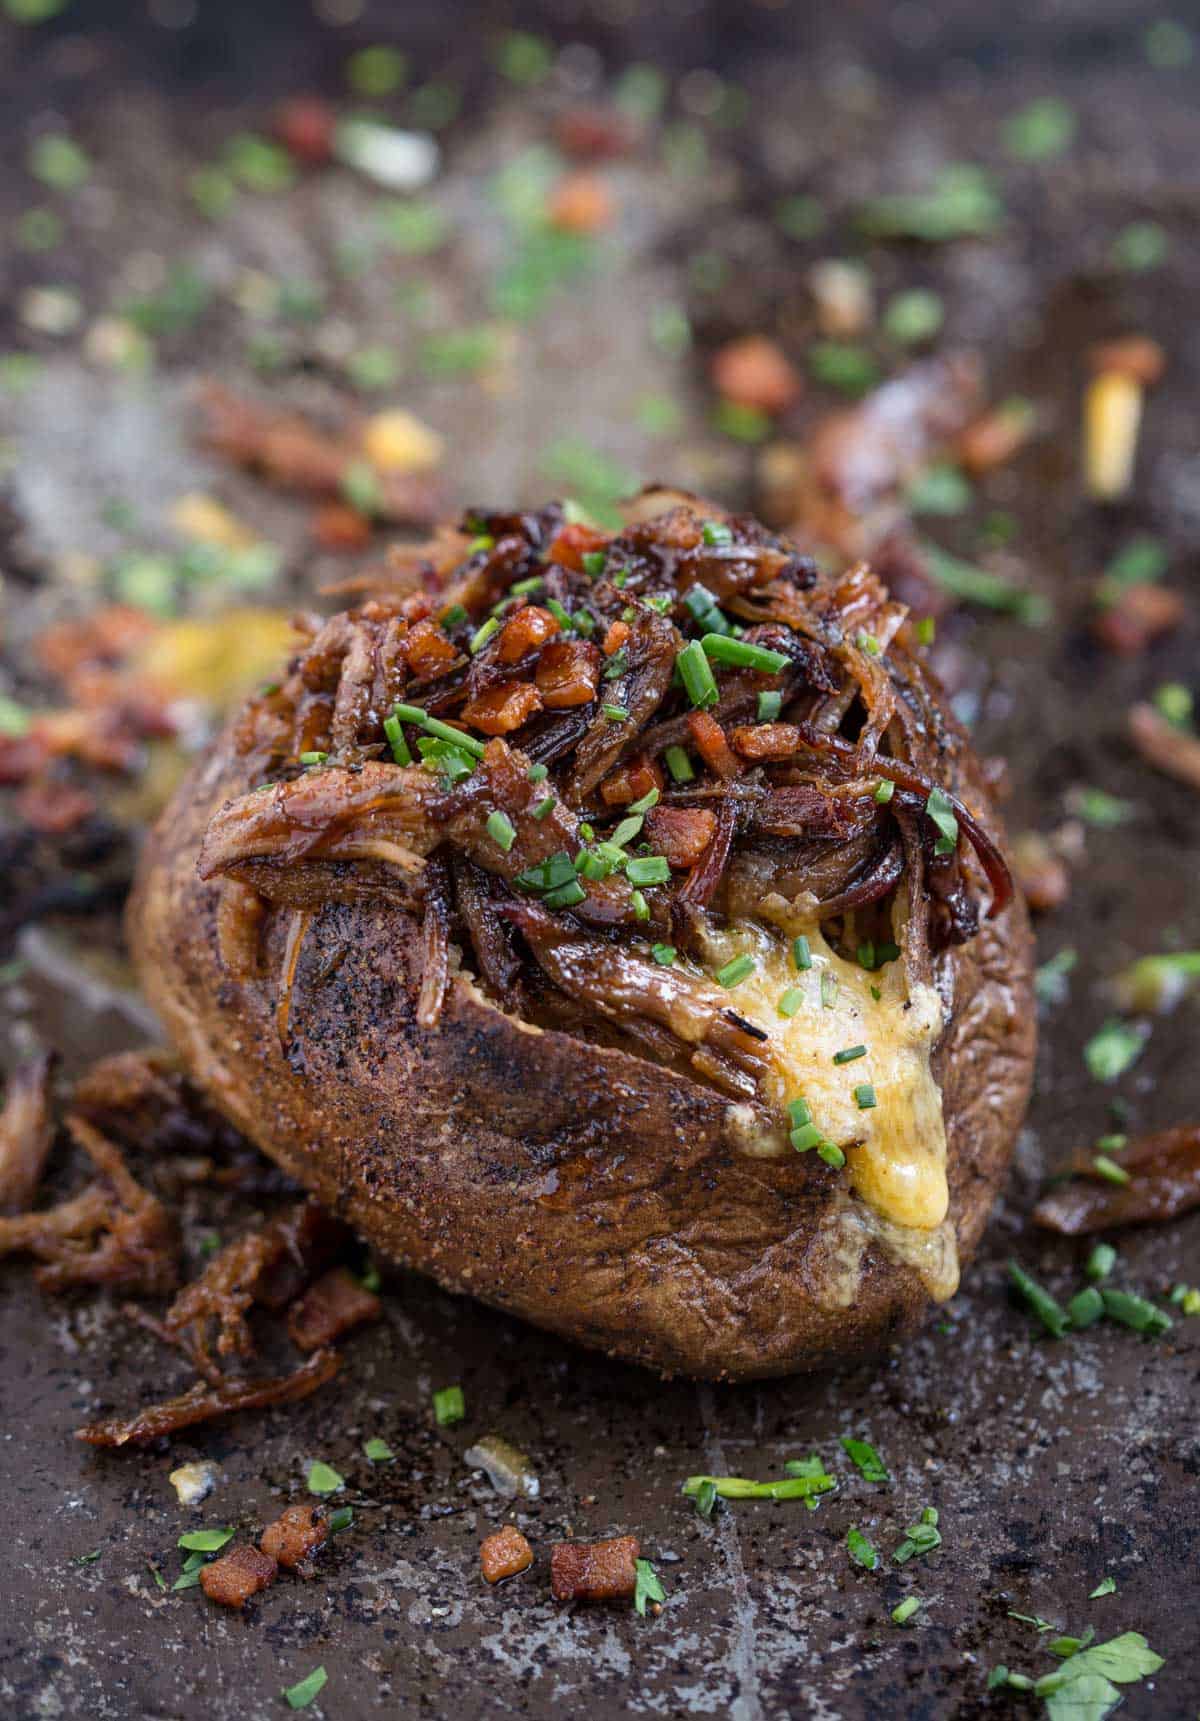 A loaded grilled baked potato topped with bbq pulled pork